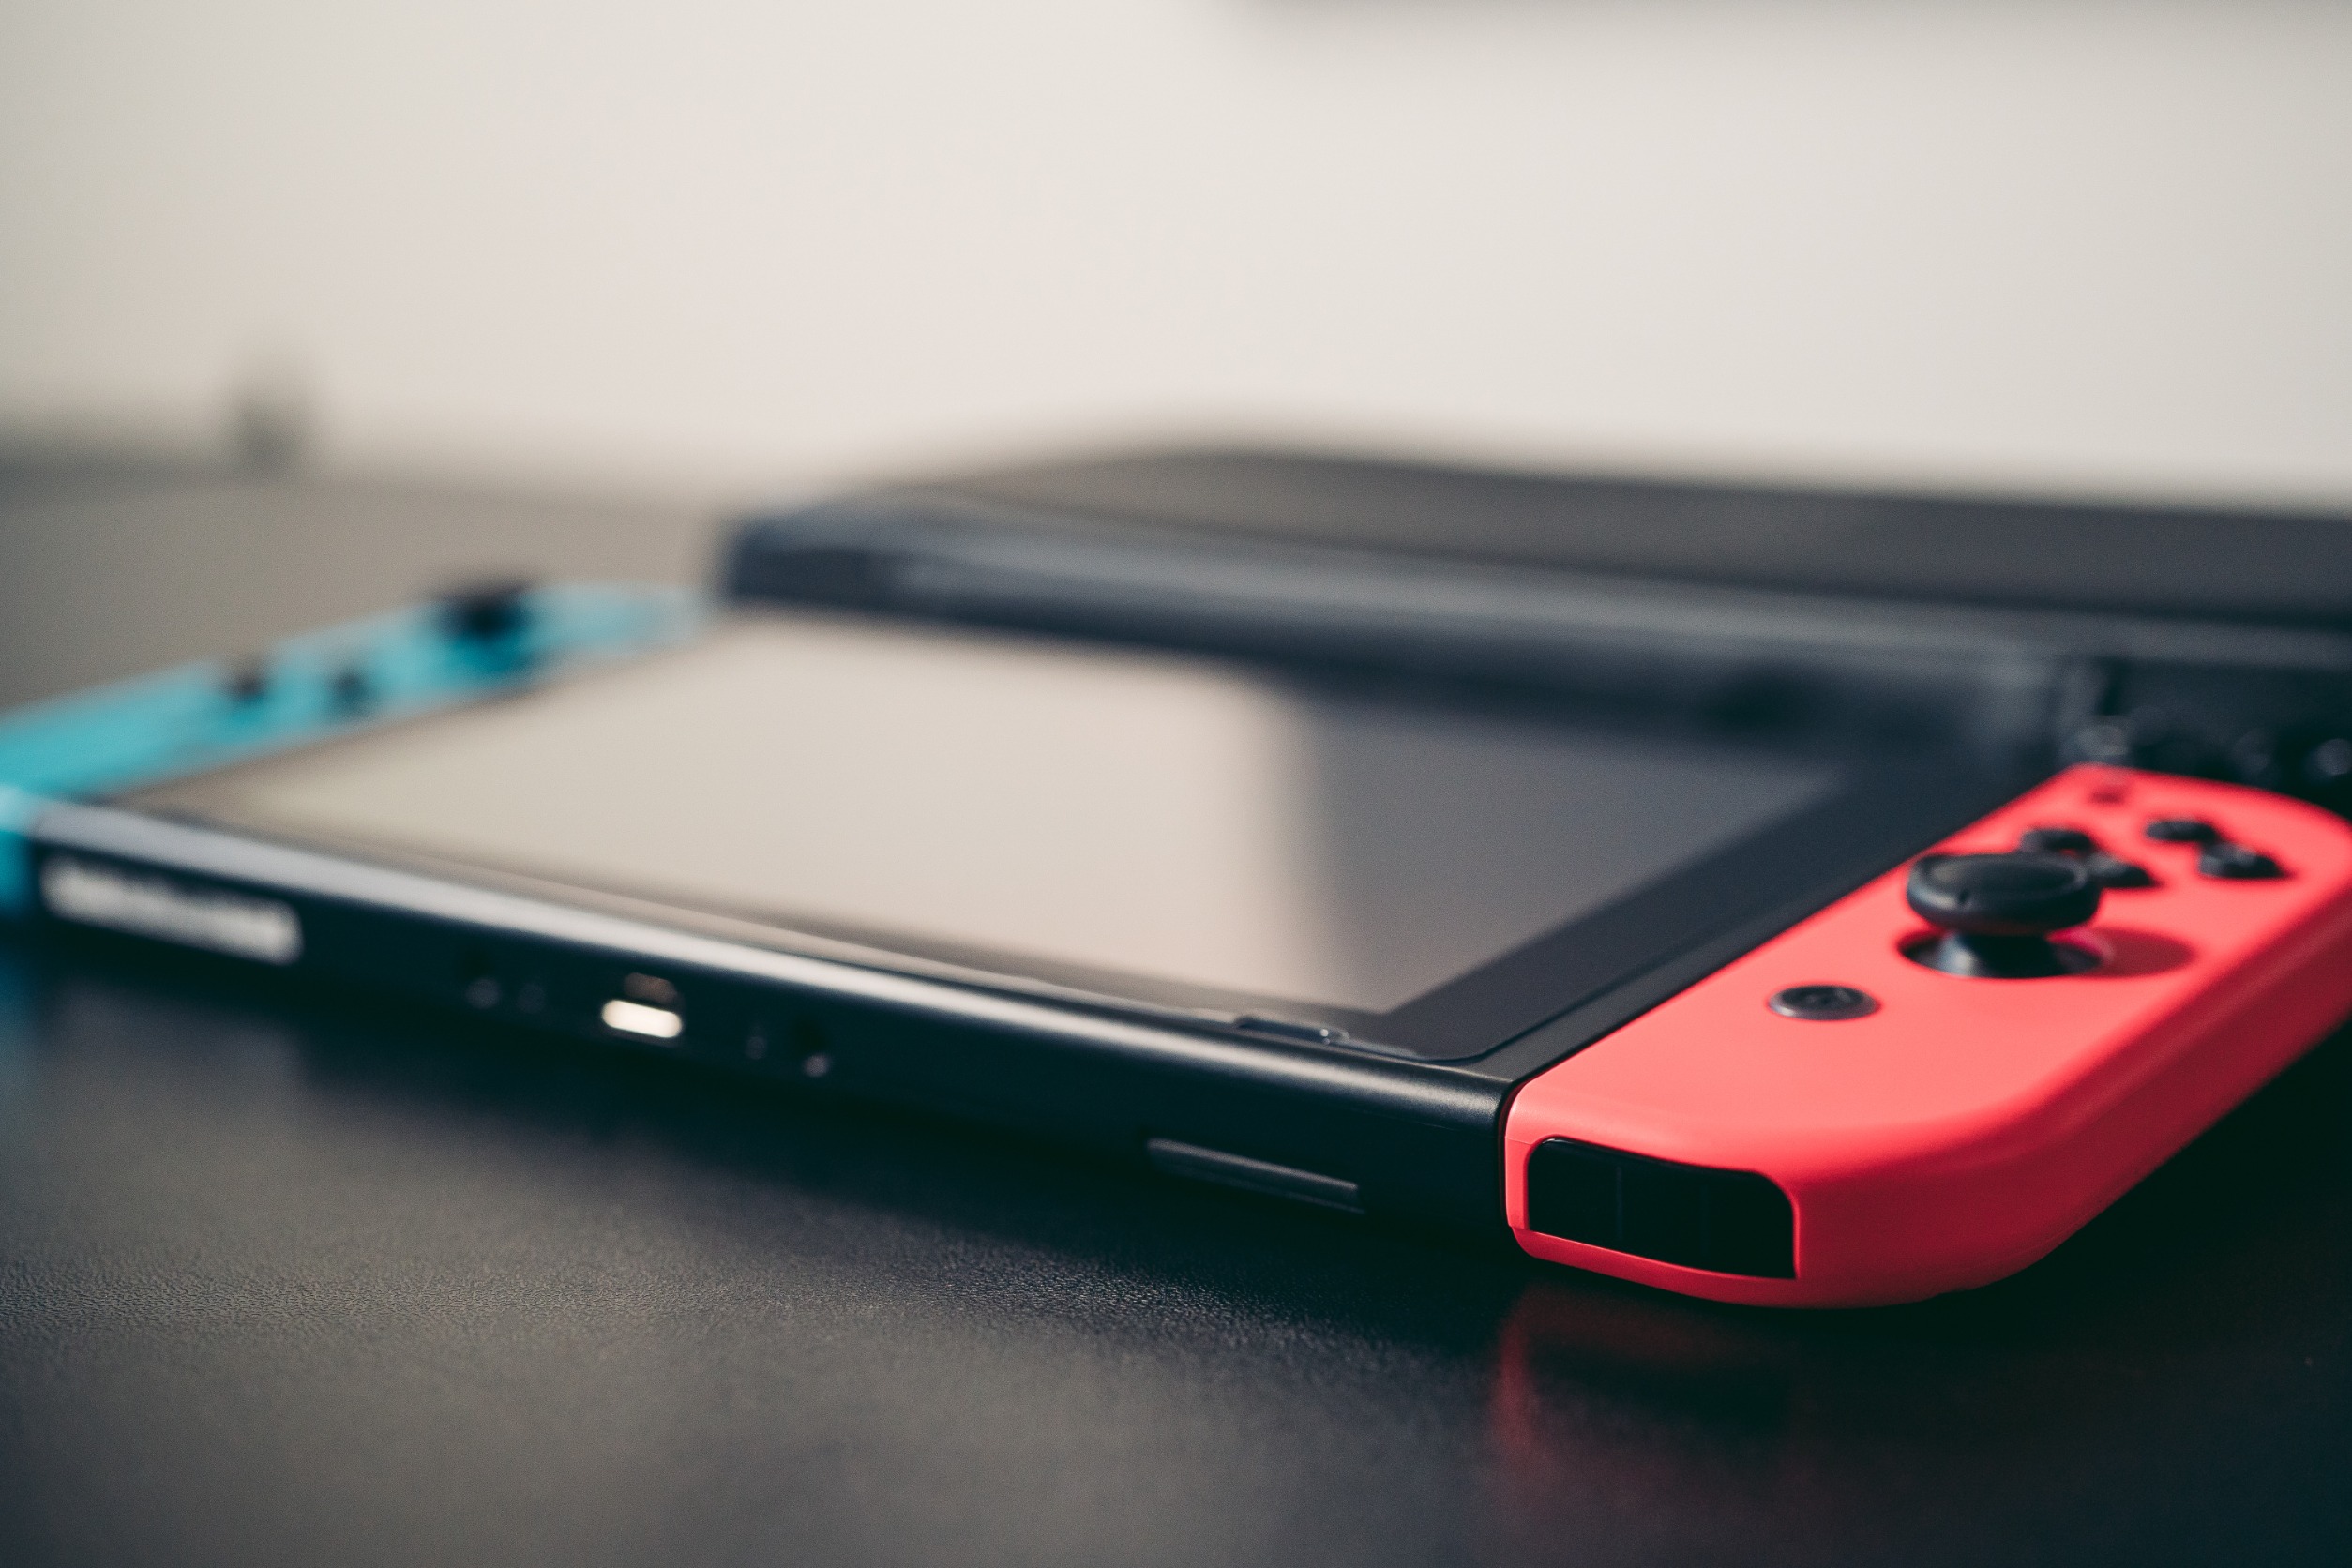 How to Set up Your Nintendo Switch for Repair